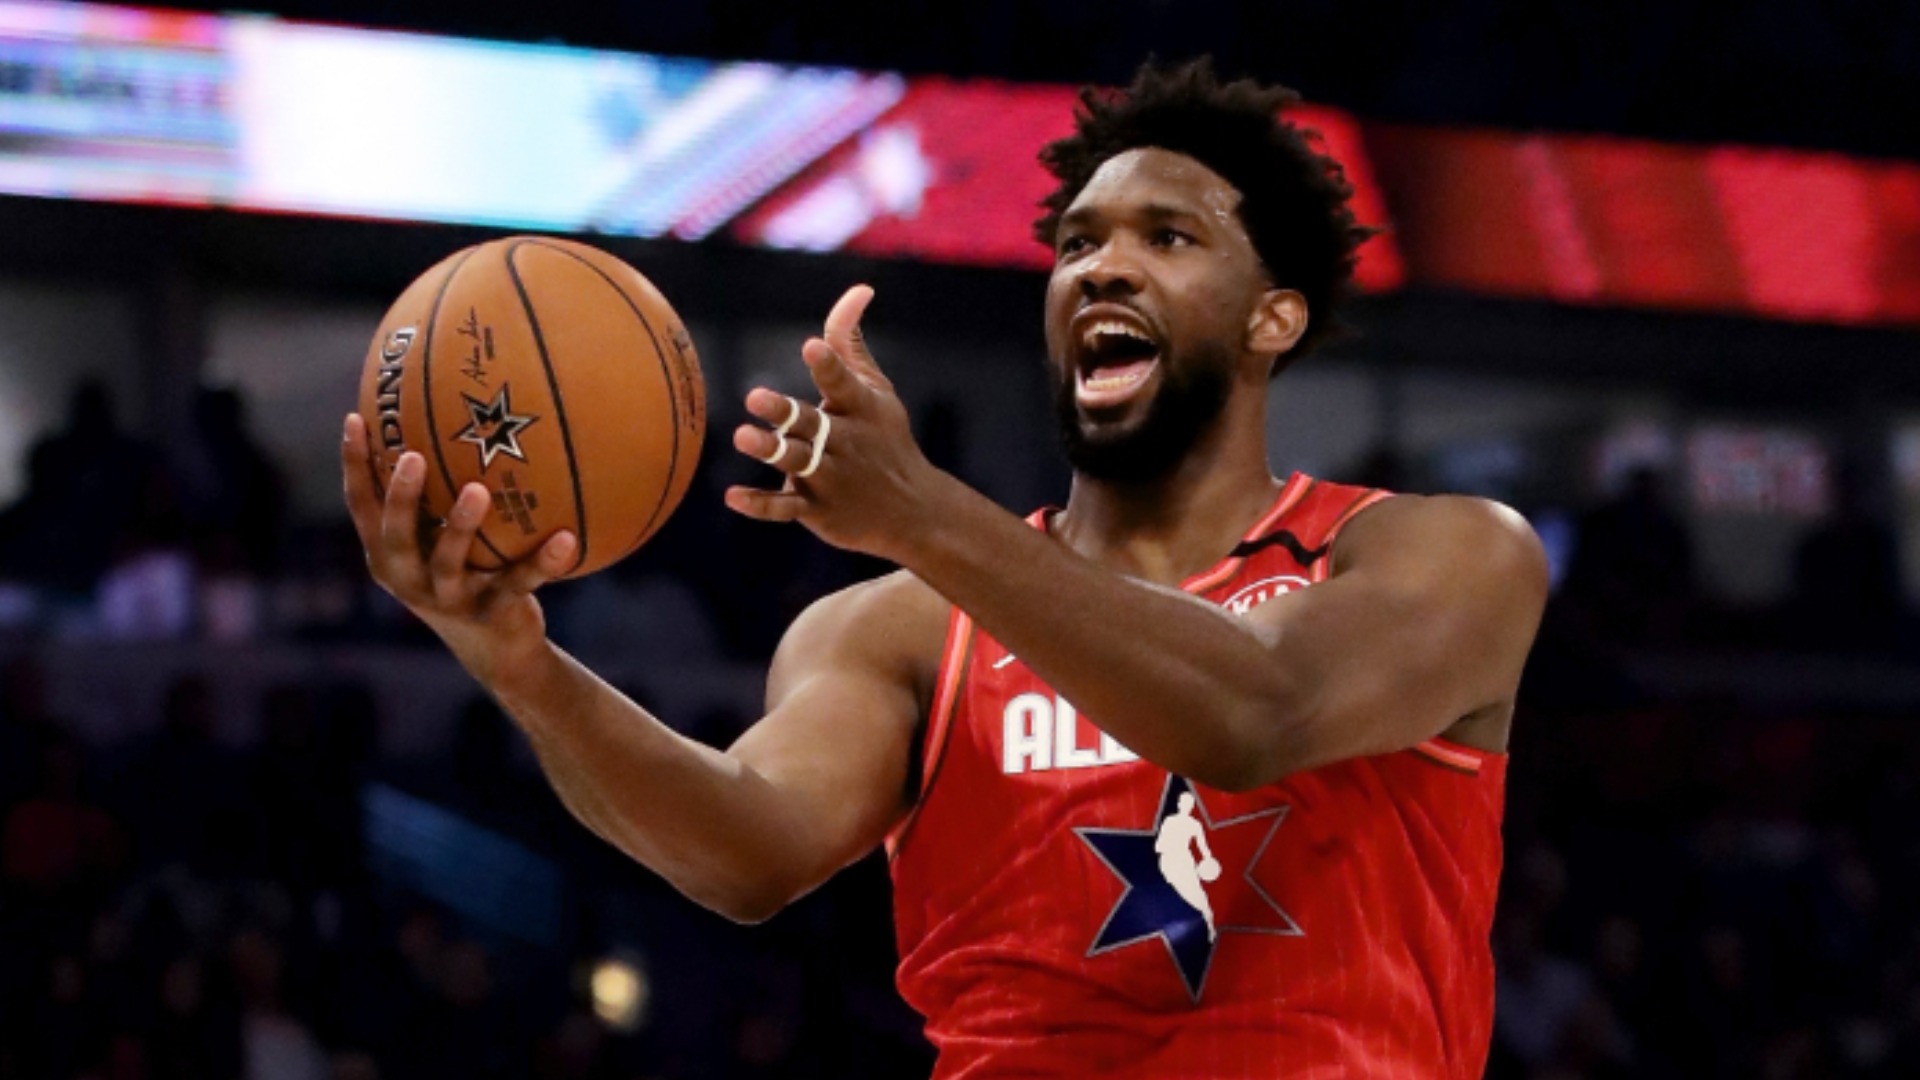 Joel Embiid backed up his All-Star Game display with a game-winning turn for the Sixers and was ready to declare himself the best around.